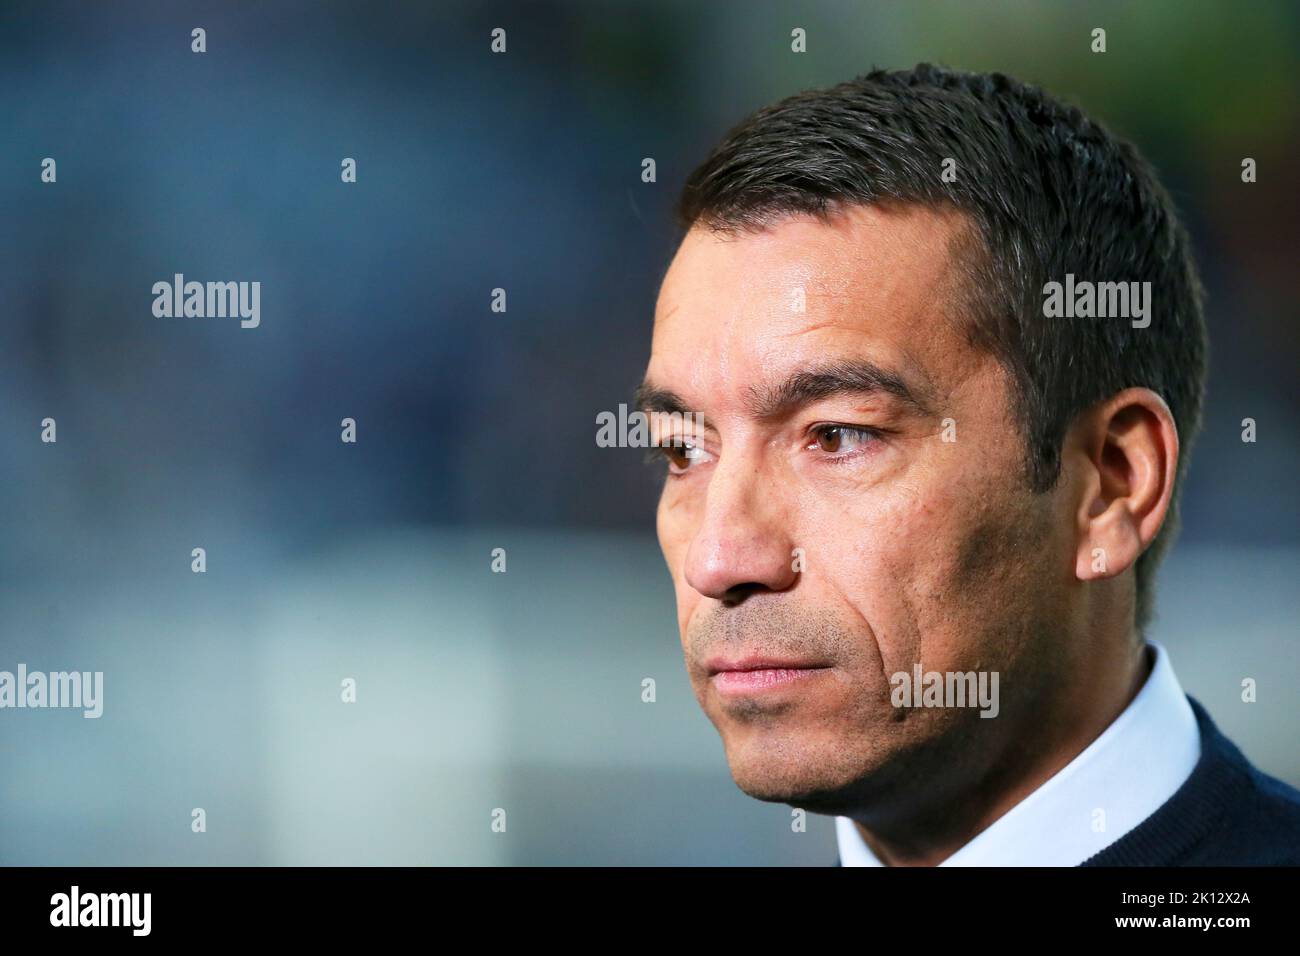 Giovanni Van Bronckhorst, manager of Rangers FC, being interviewed at Ibrox Park football stadium, Glasgow, Scotland before the UEFA Champions League Stock Photo